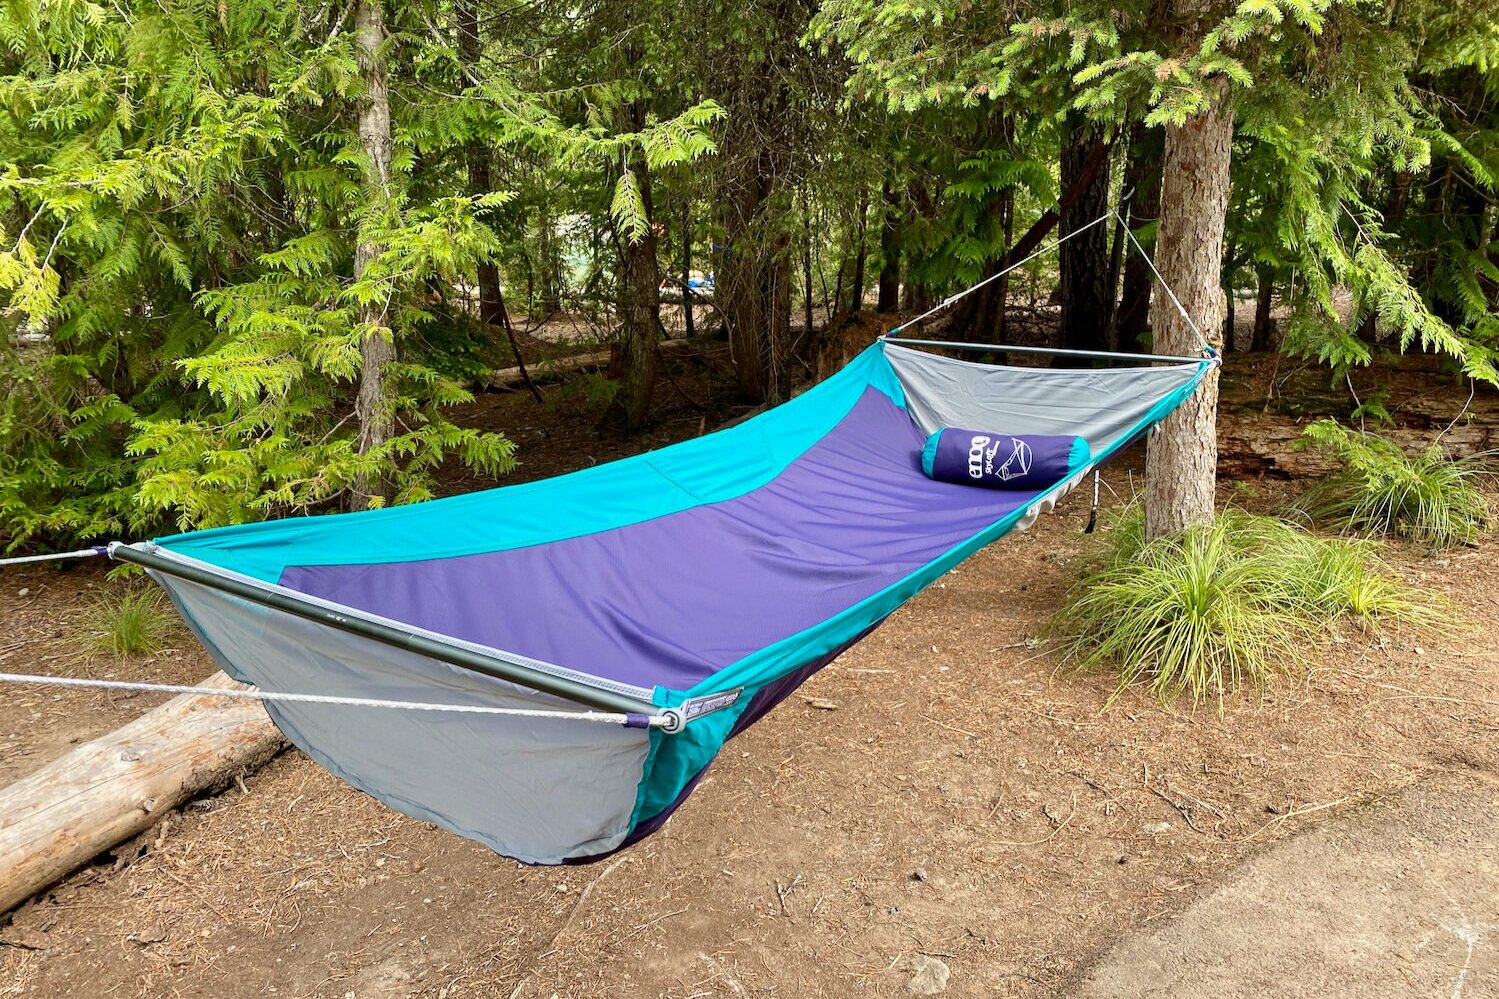 The luxurious ENO Skyloft is our favorite hammock for car camping because it’s spacious and can be used in a more upright position for lounging